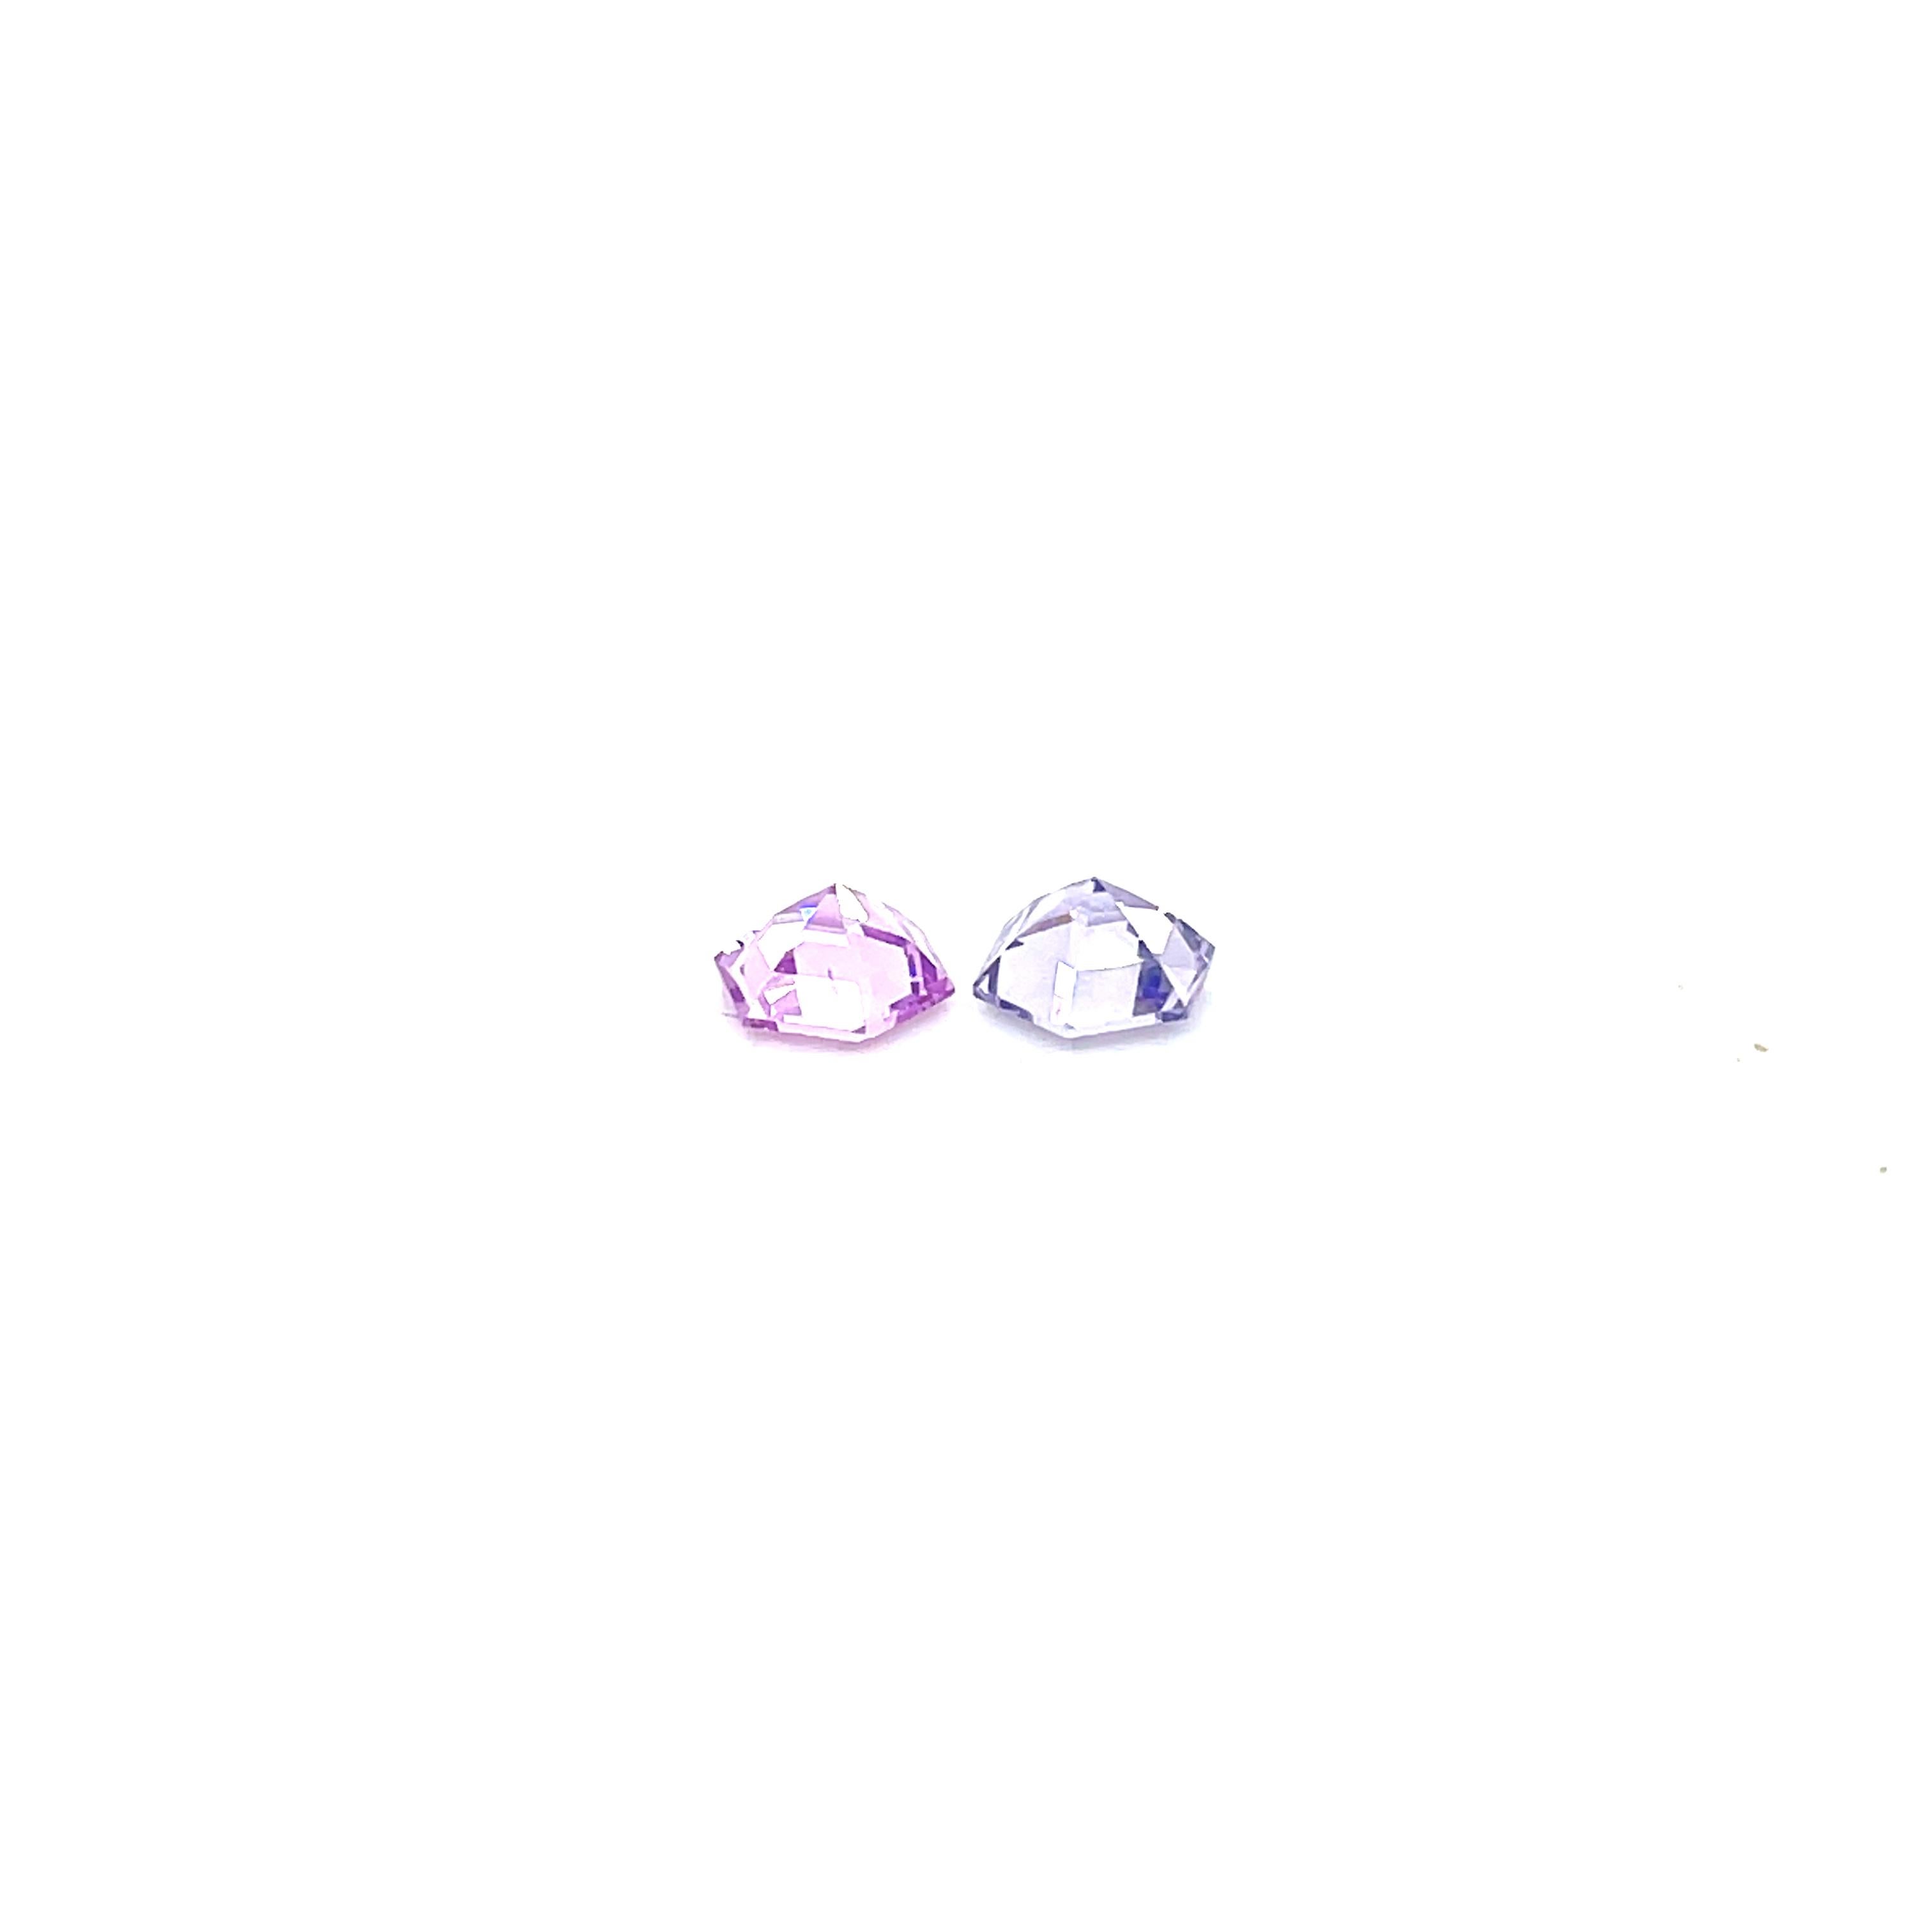 Lost in beauty in every facet with Hexagon Pink and Light Pink Sapphire, 1.58cts—a stunning unheated gemstone that embodies grace and elegance.

These sapphires' unusual hexagonal shape gives a special touch to any jewelry piece.

The hexagon, with